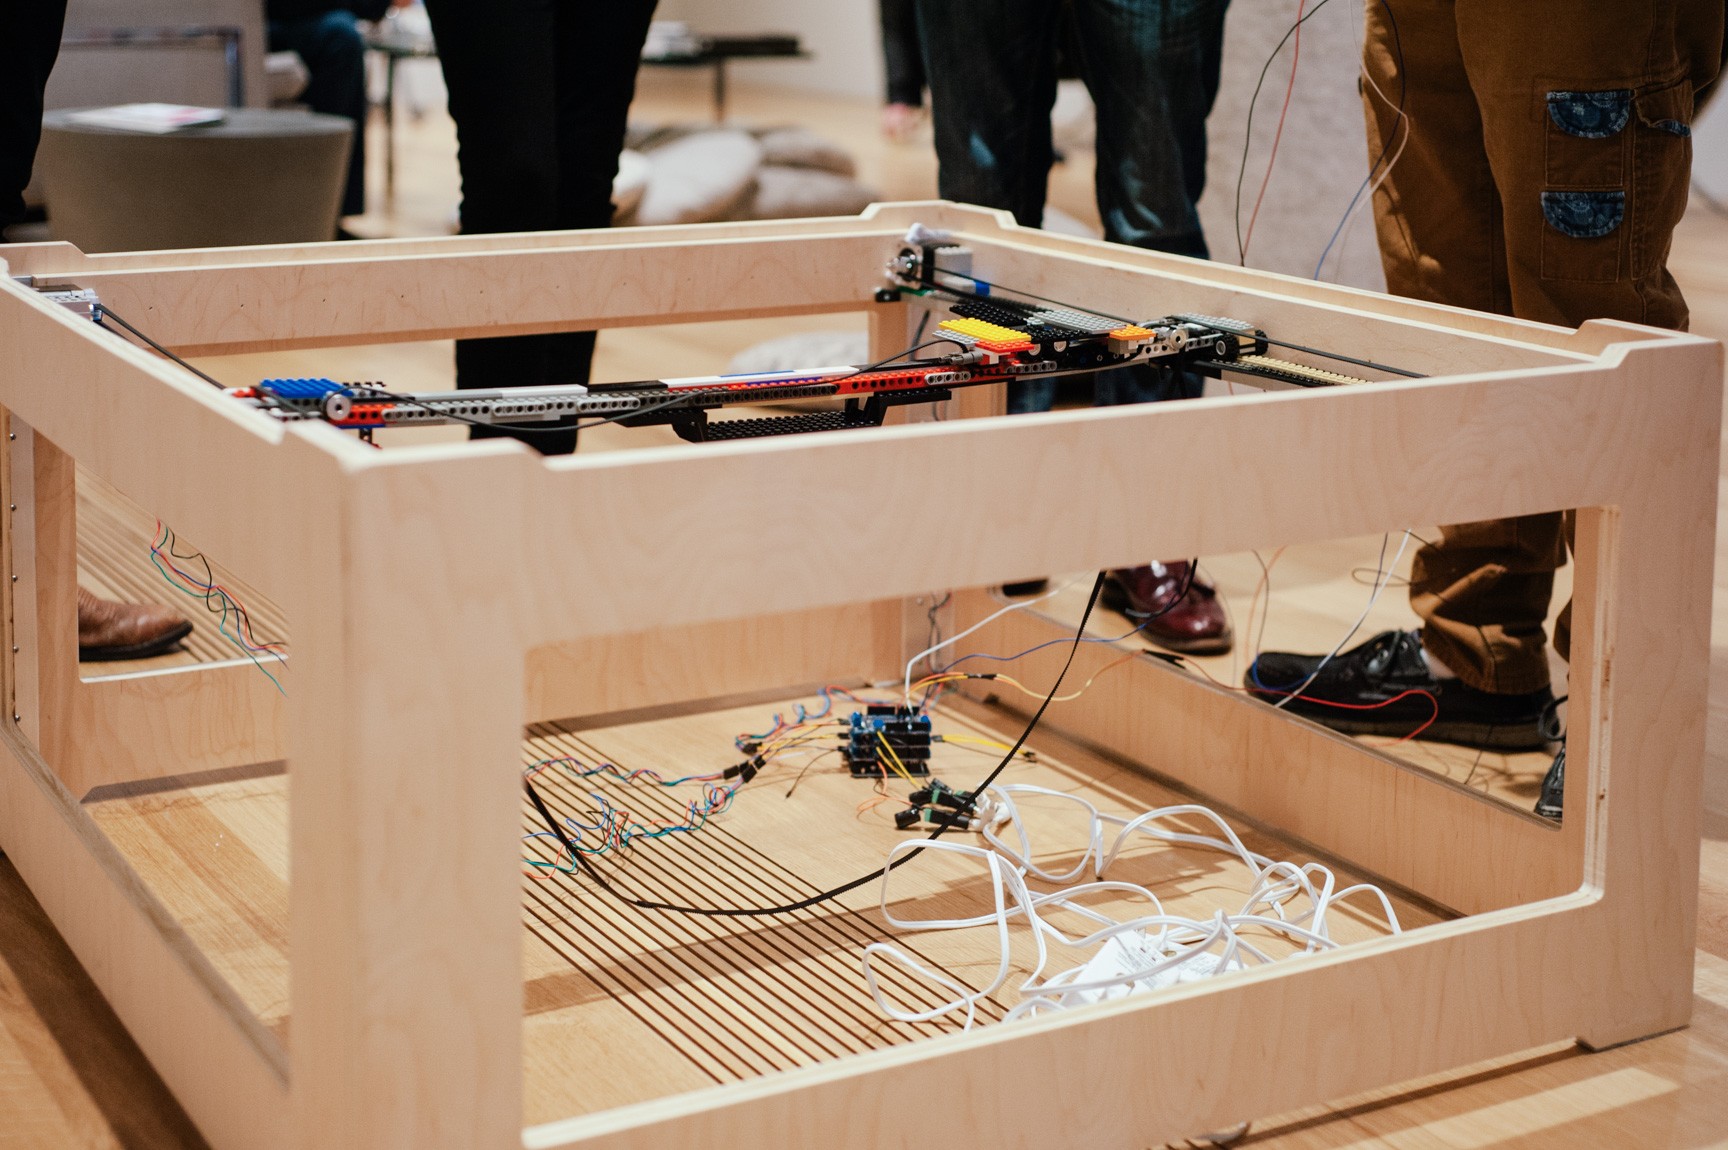 Collaborators stand around a homemade square wooden 3-D printer with wires hanging around it.